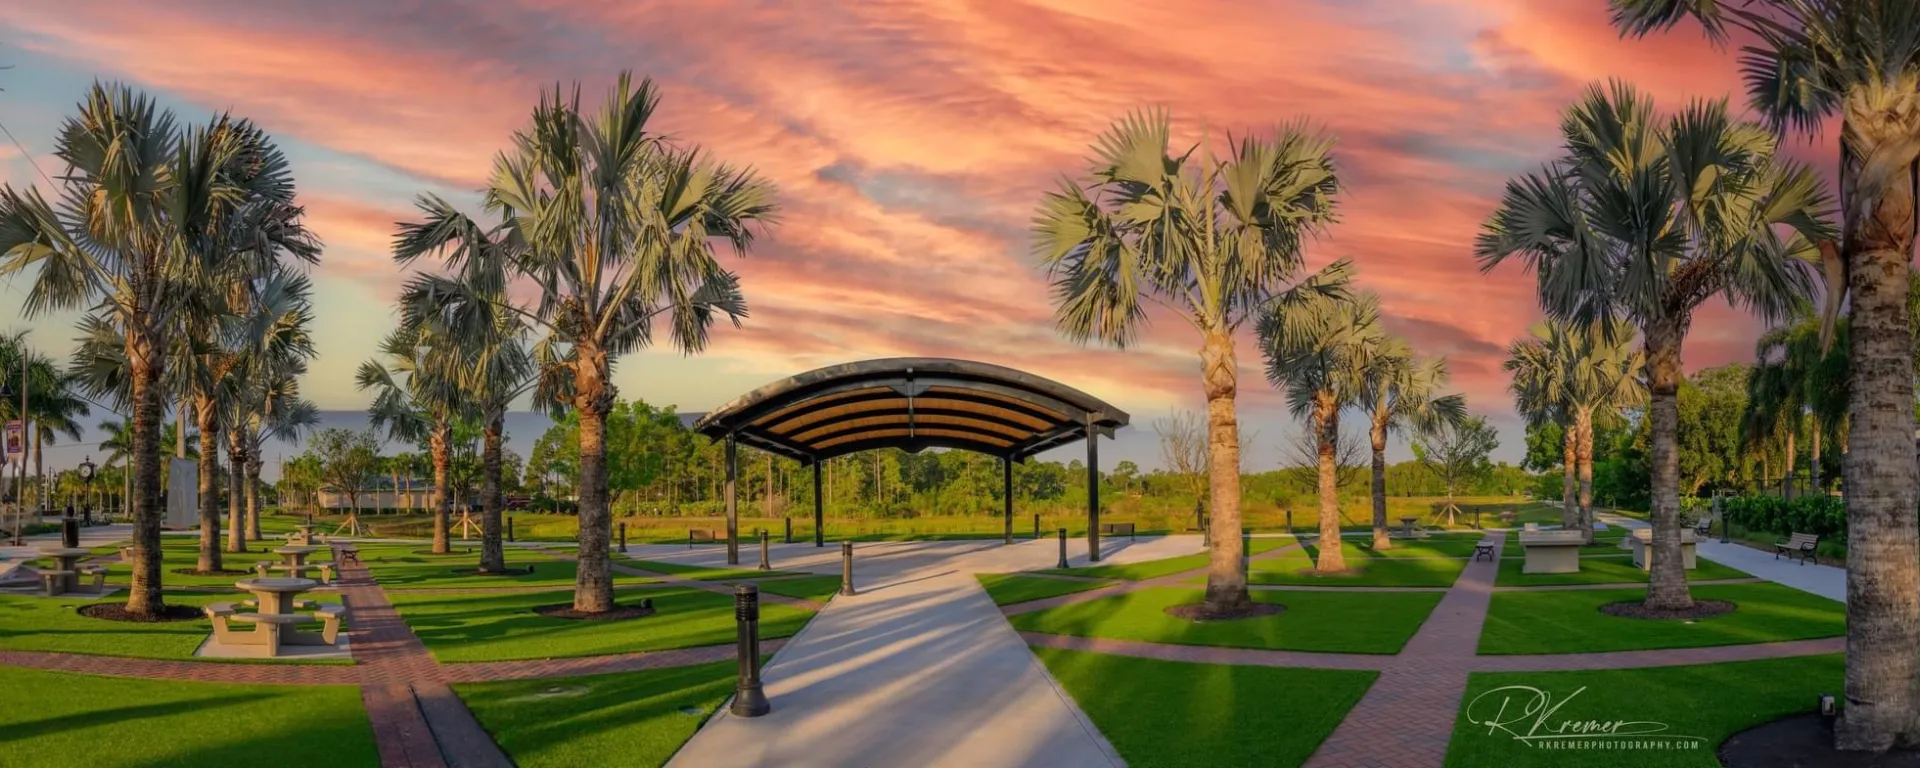 Photography by Rick Kremer of The Patio at Palm City Place during sunrise 